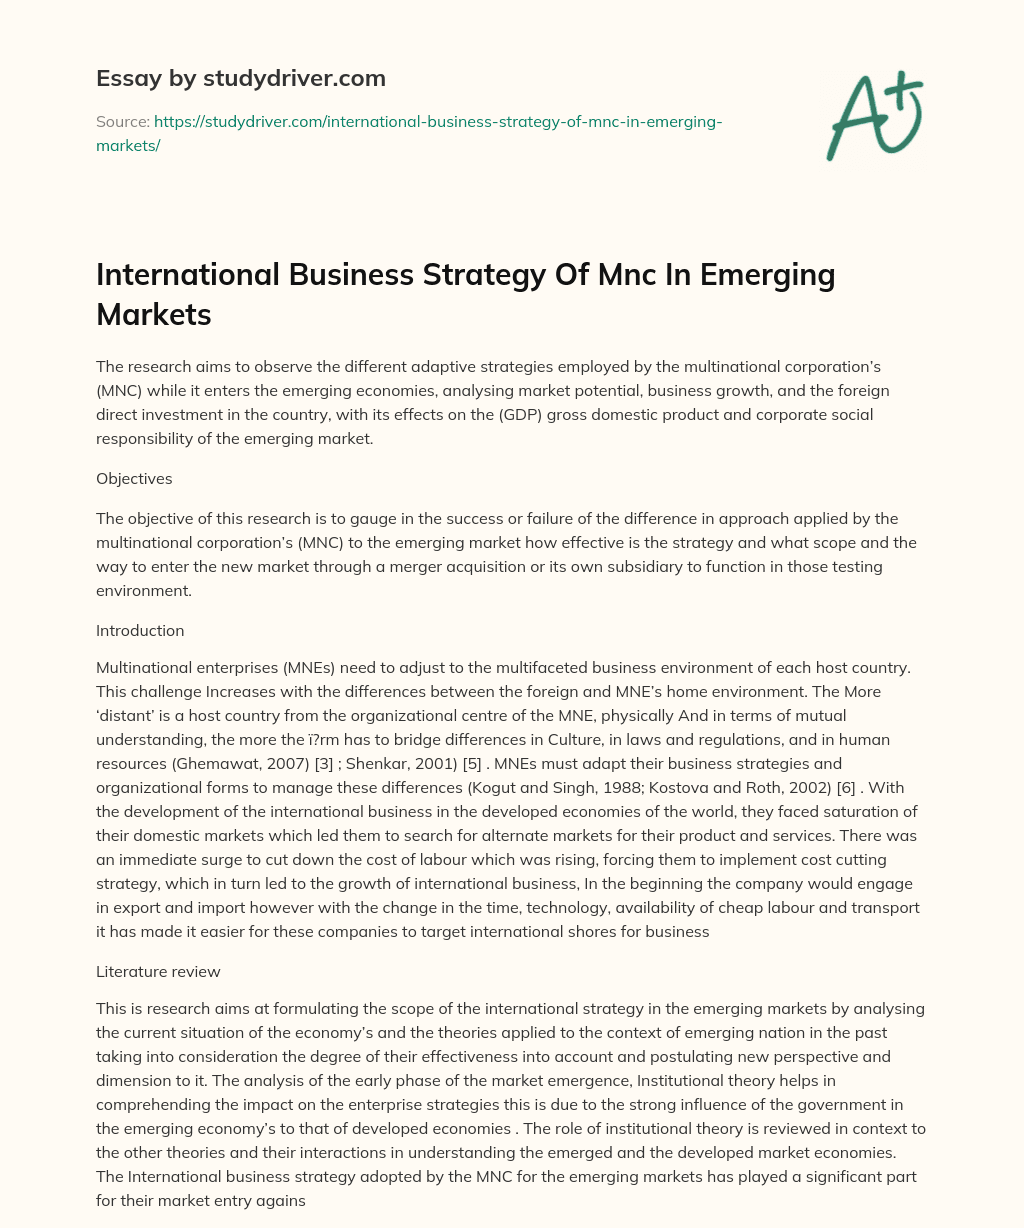 International Business Strategy of Mnc in Emerging Markets essay